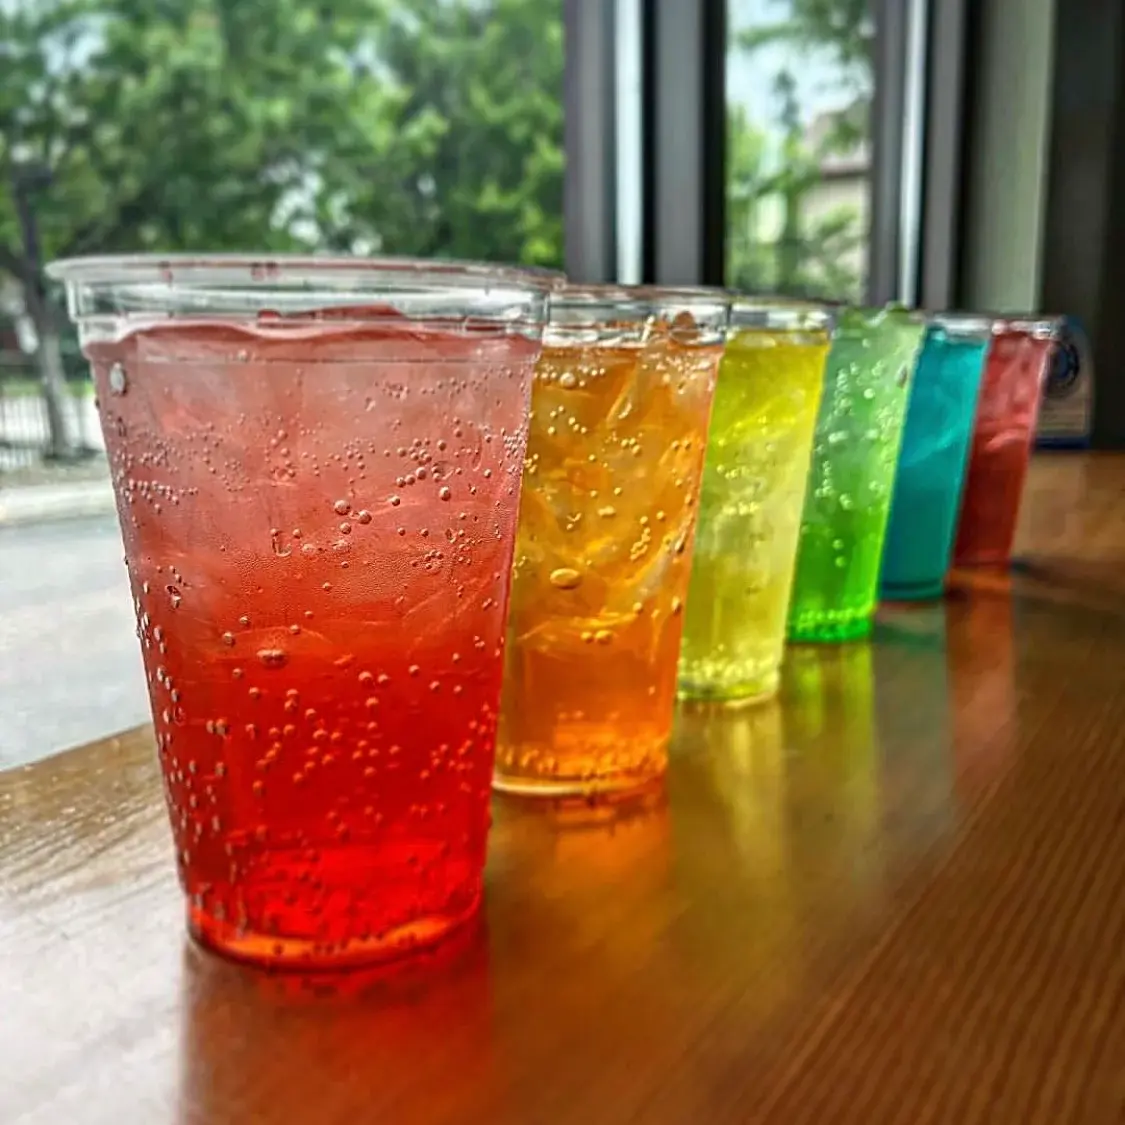 Six bubbly drinks lined up, all different colors from red to purple.